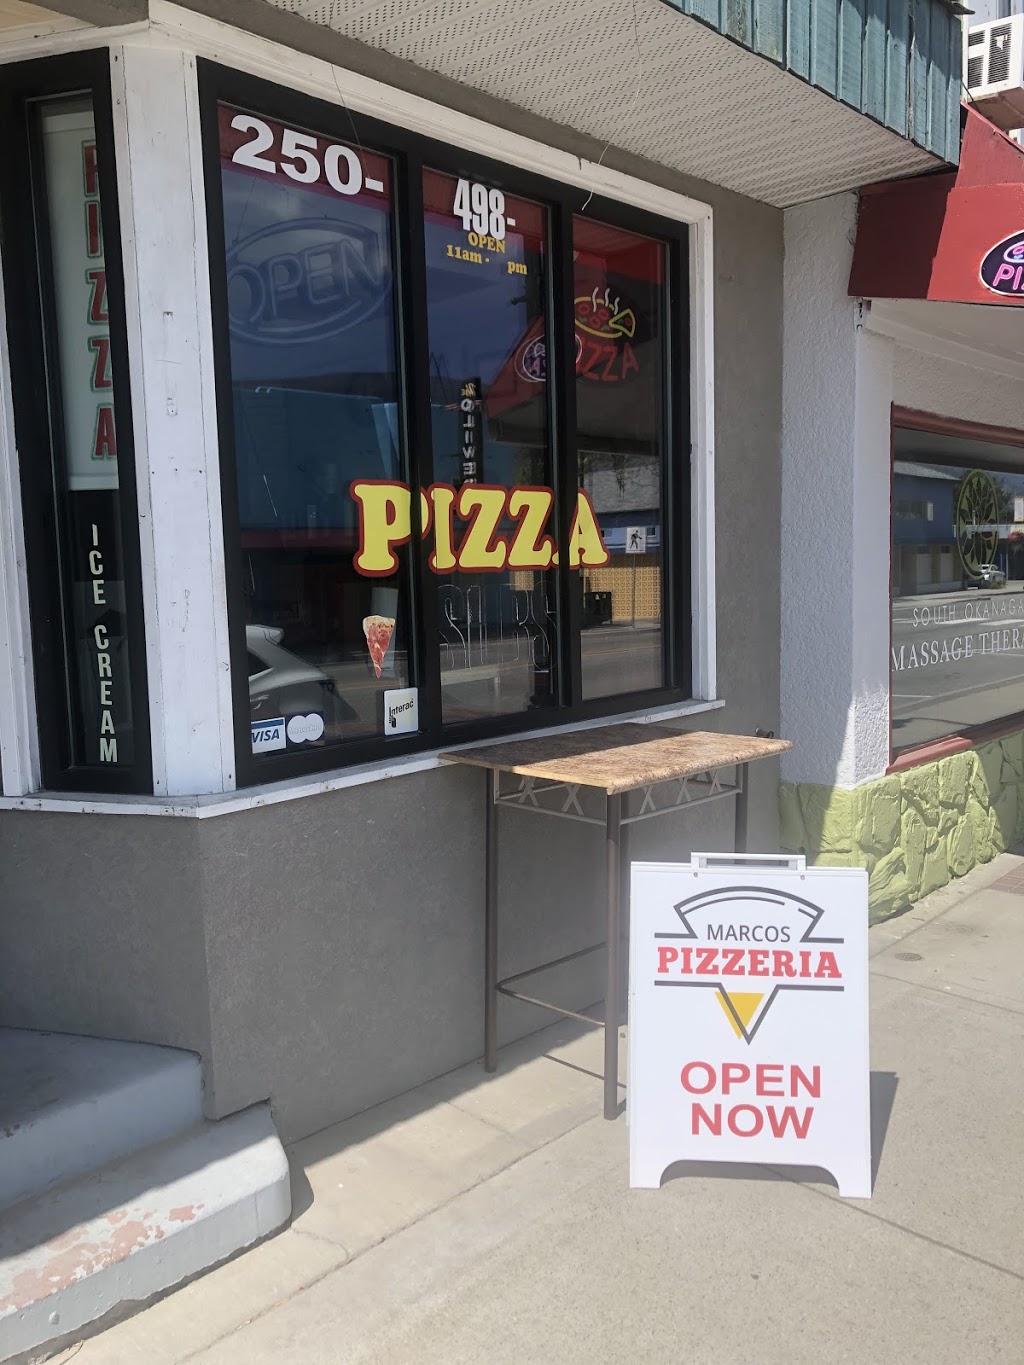 Marcos Pizzeria Oliver BC | 6372 Main St, Oliver, BC V0H 1T0, Canada | Phone: (250) 940-9002